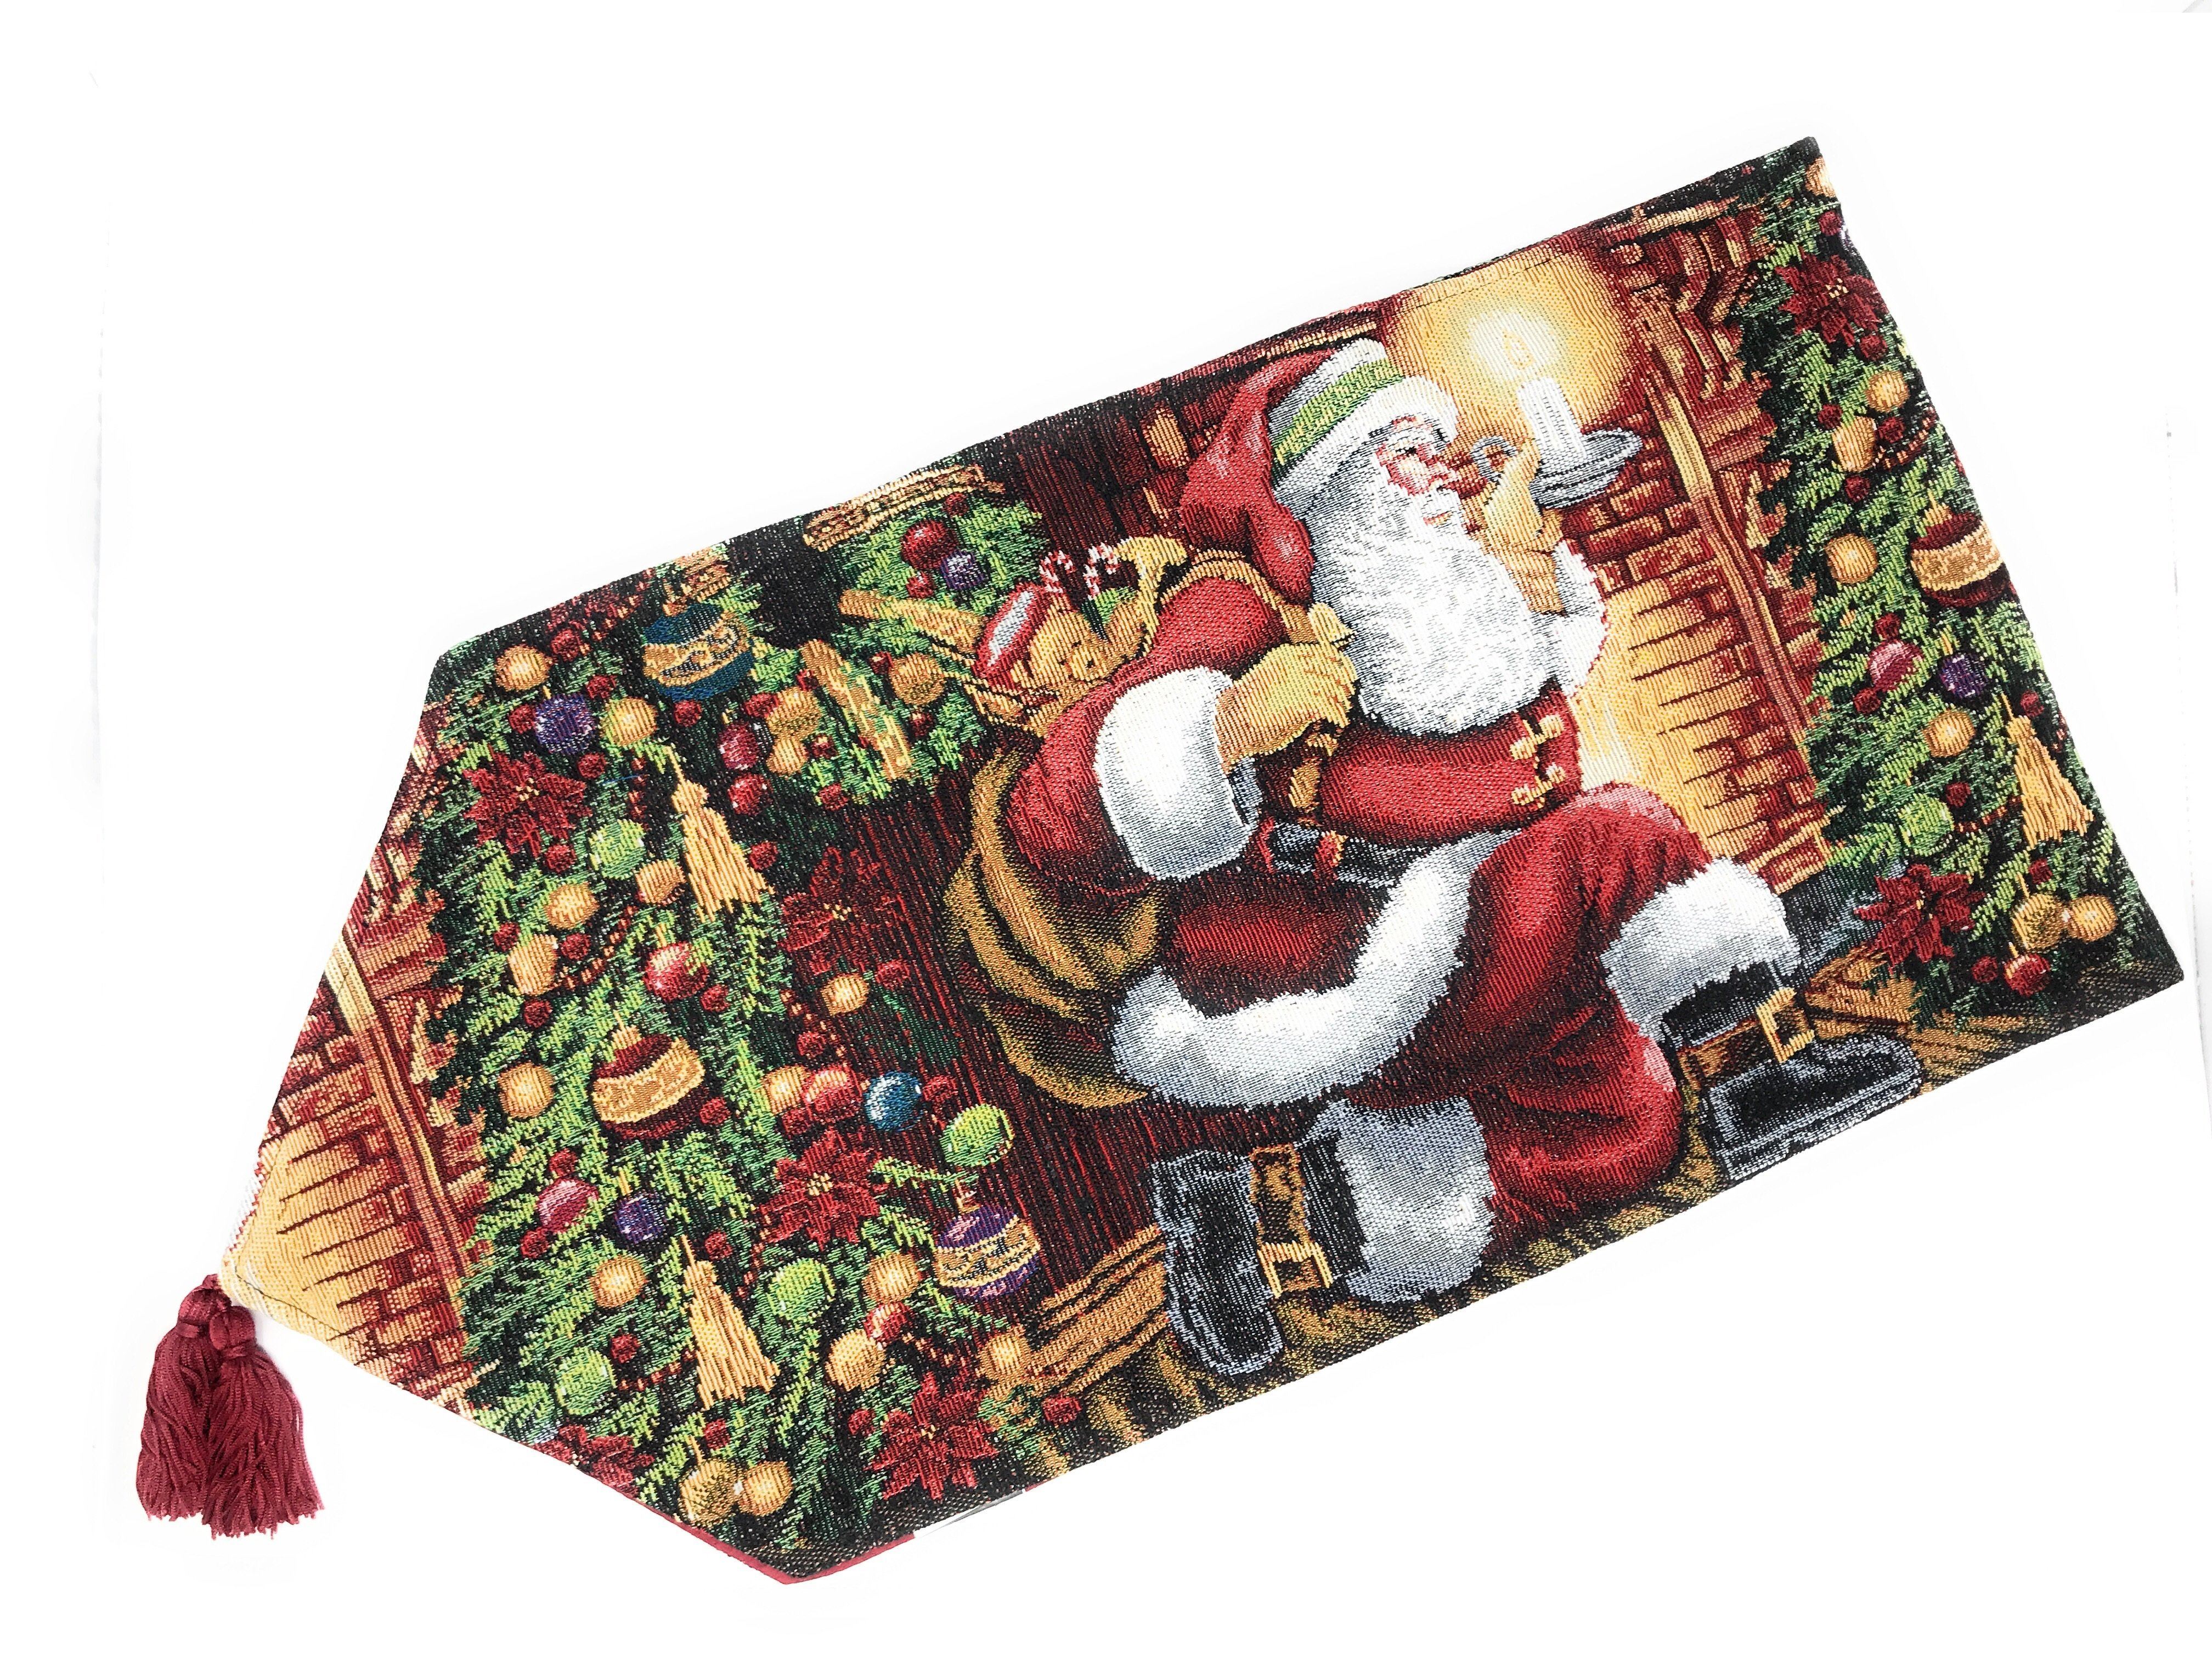 Tache Festive Down the Chimney Woven Tapestry Table Runners (DB11533) - Tache Home Fashion